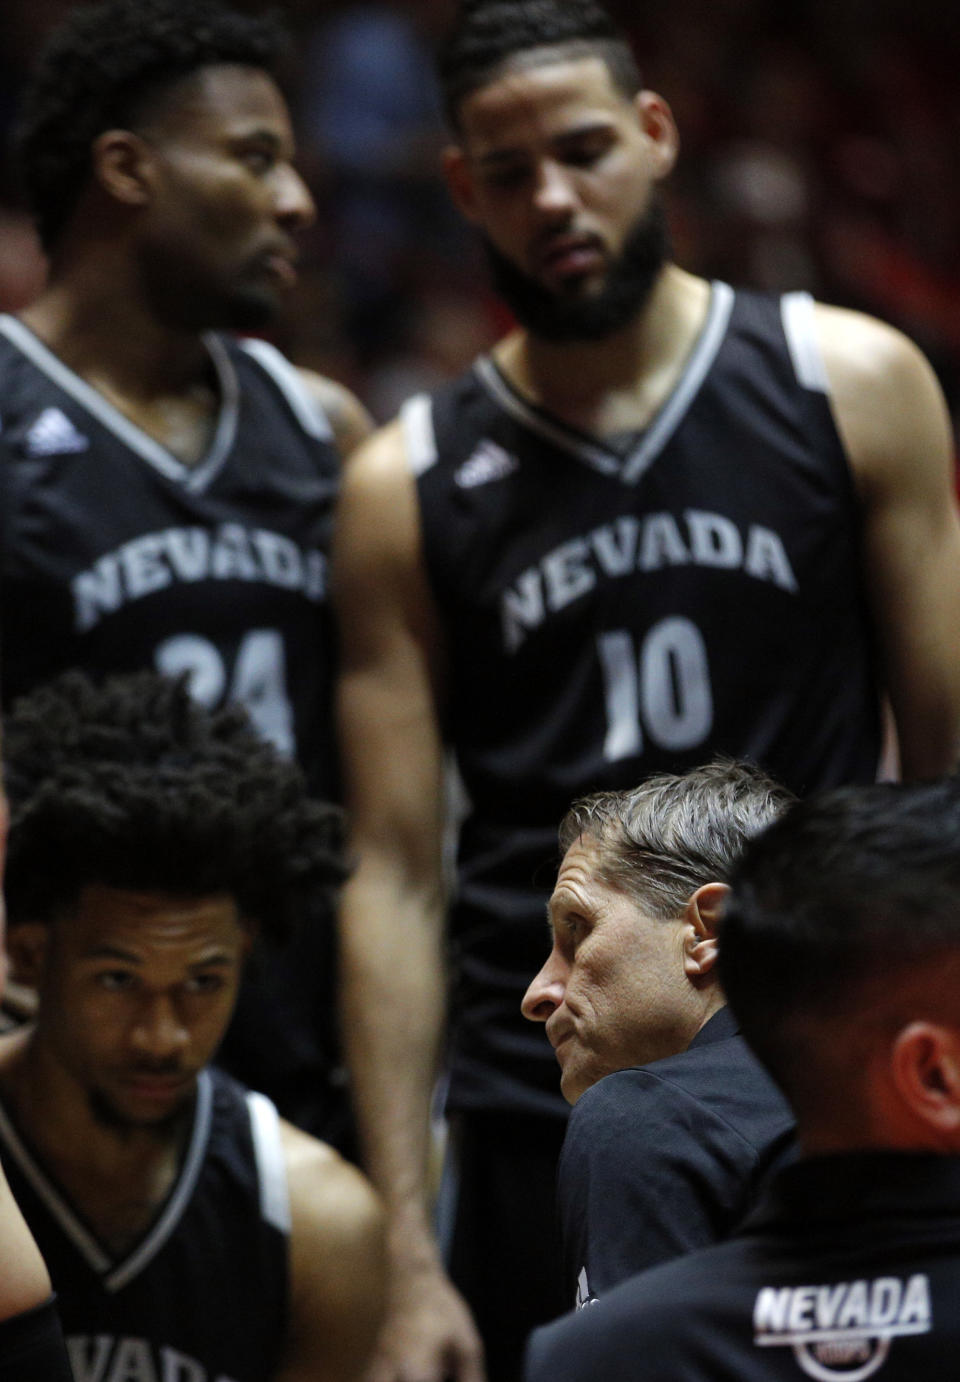 Nevada head coach Eric Musselman gives instructions to his players during a timeout in the second half of an NCAA college basketball game against New Mexico in Albuquerque, N.M., Saturday, Jan. 5, 2019. New Mexico won 85-58. (AP Photo/Andres Leighton)